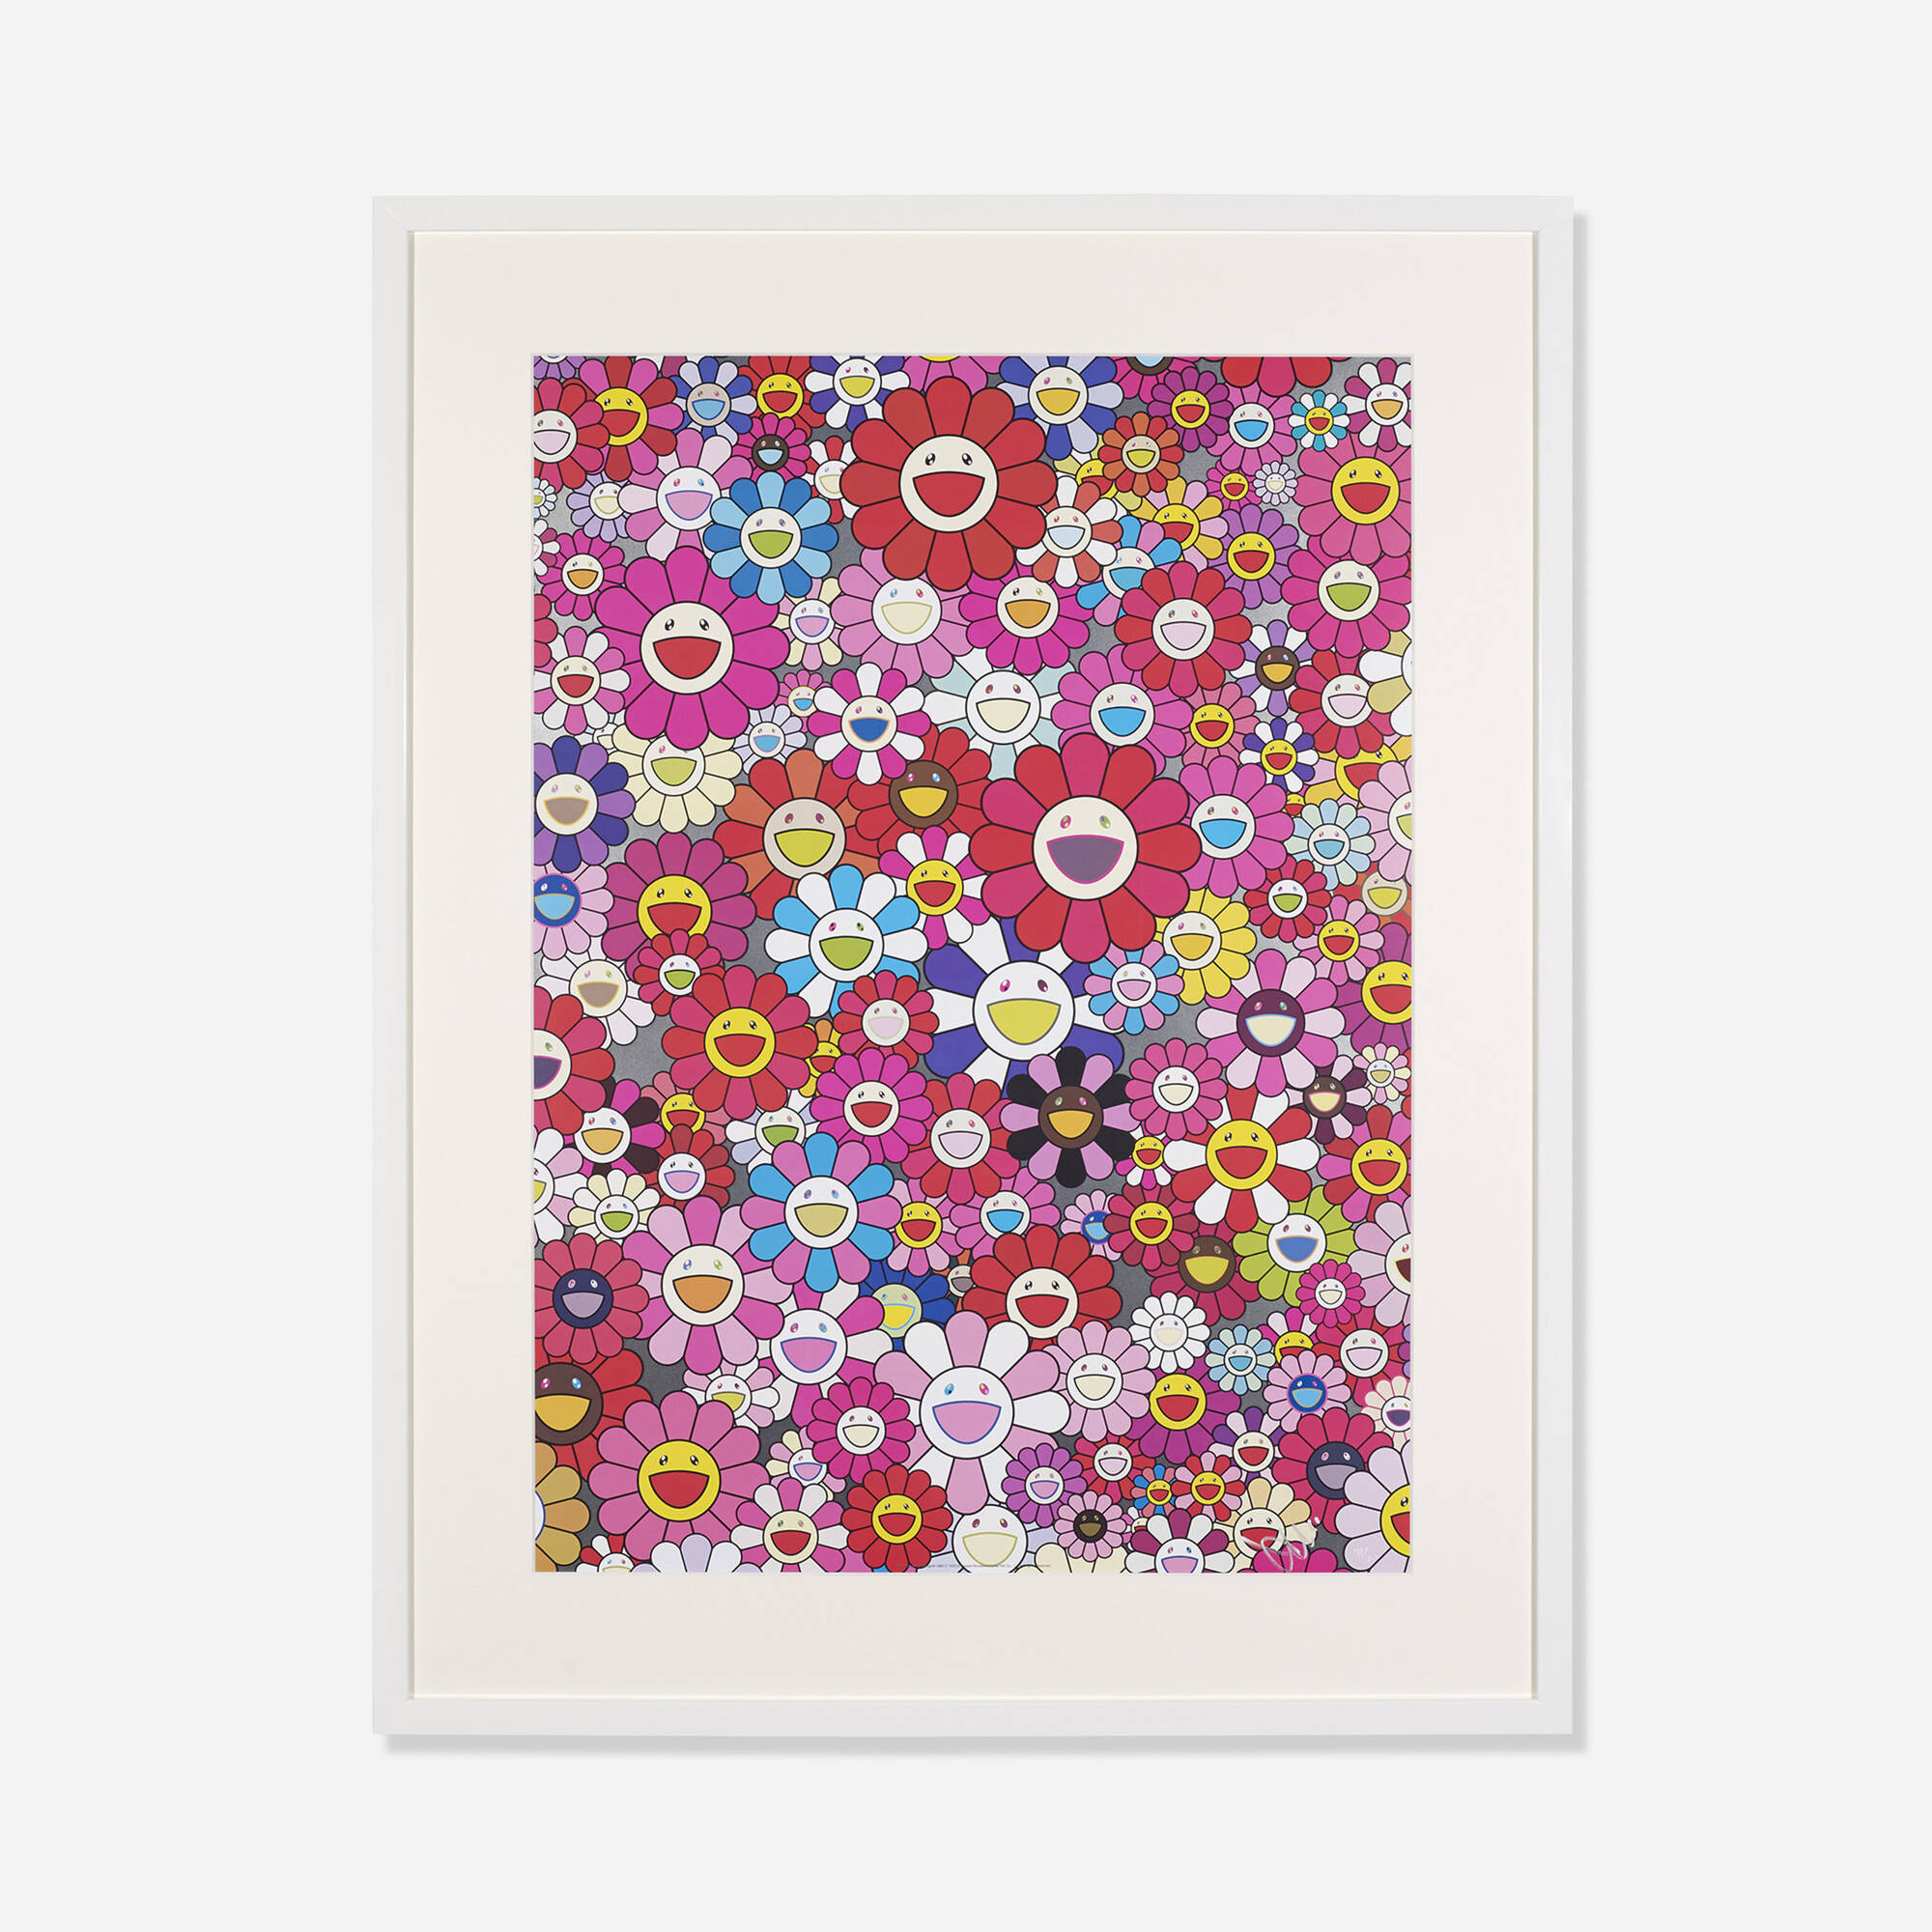 264: TAKASHI MURAKAMI, An Homage To (collection of four works)